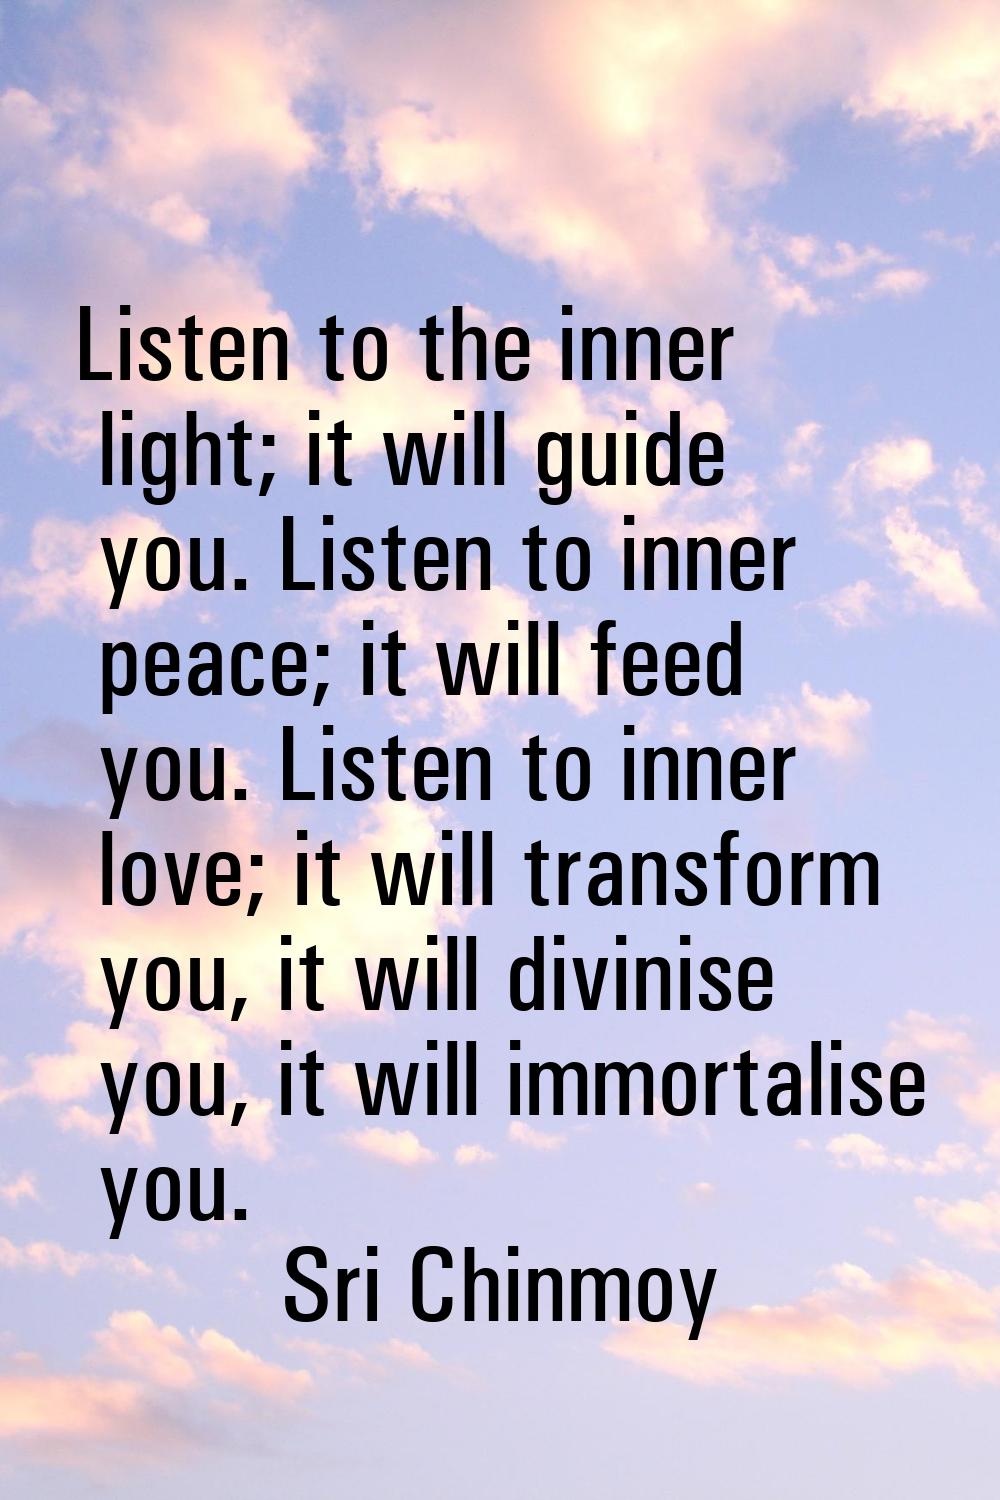 Listen to the inner light; it will guide you. Listen to inner peace; it will feed you. Listen to in